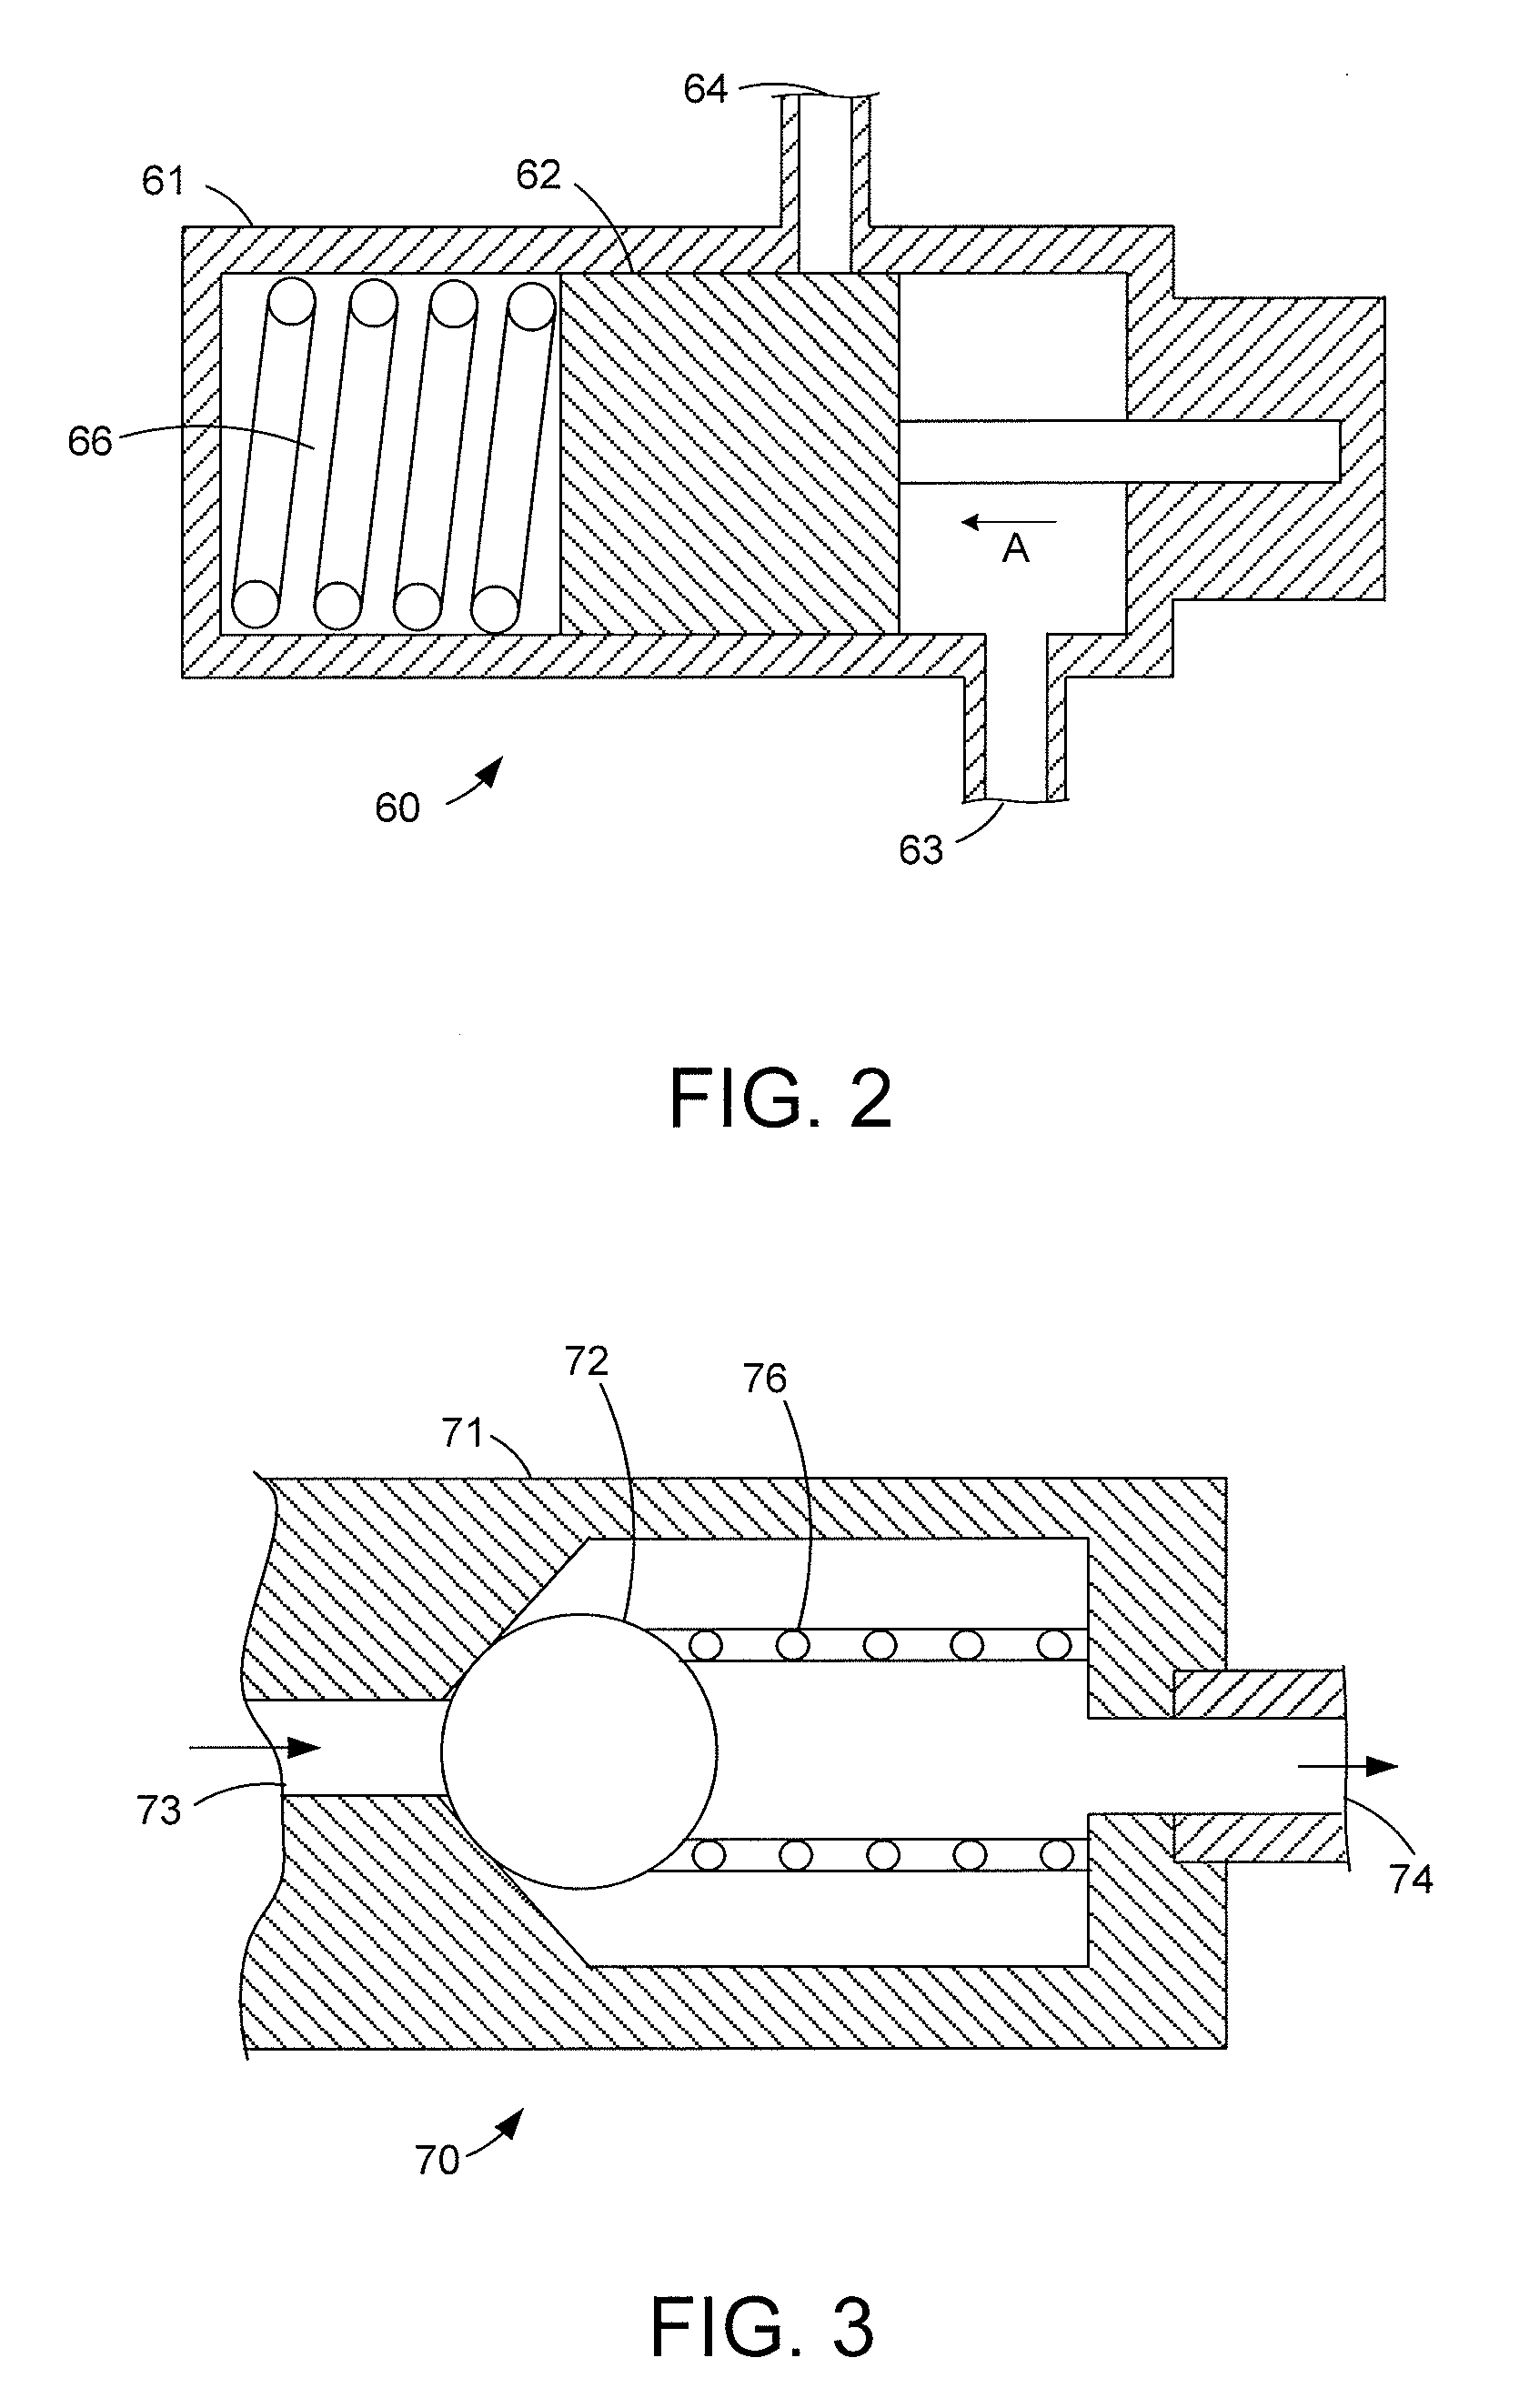 Oil supply system for an engine